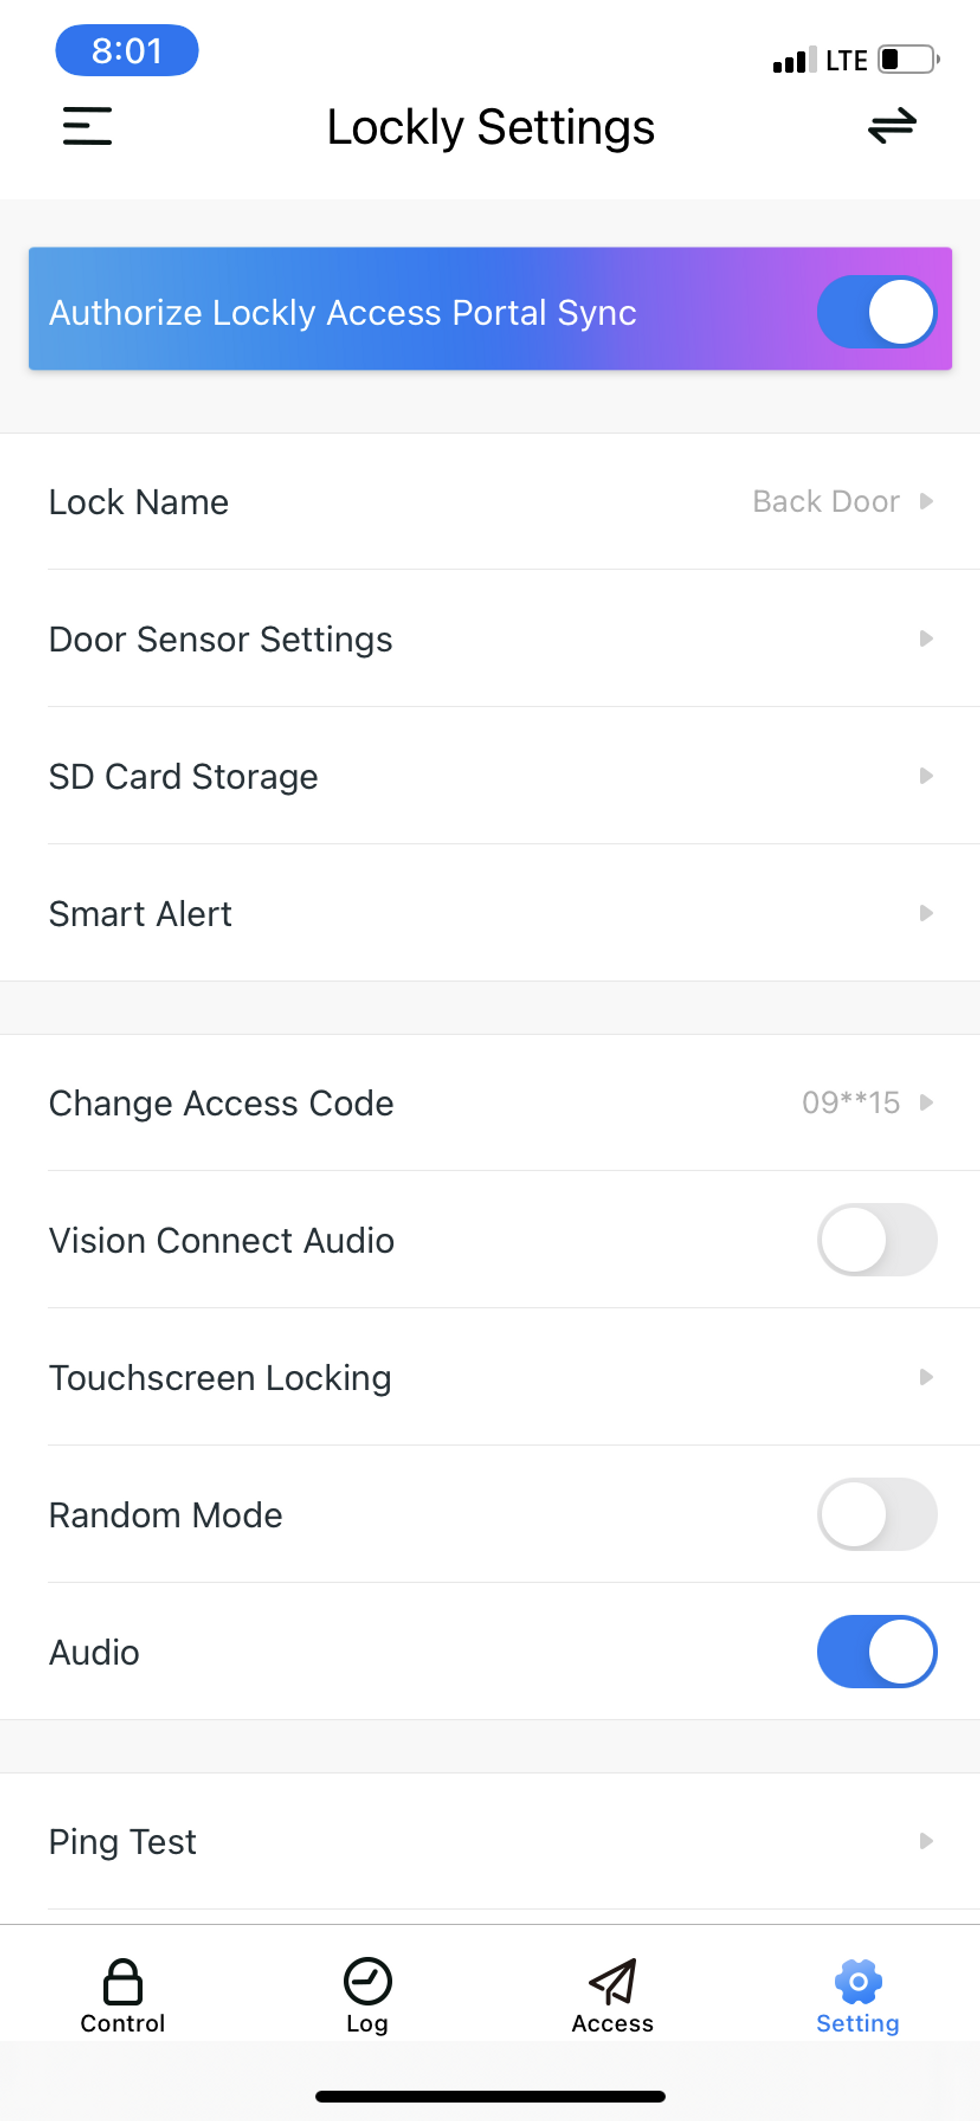 Lockly Vision Settings page in Lockly app